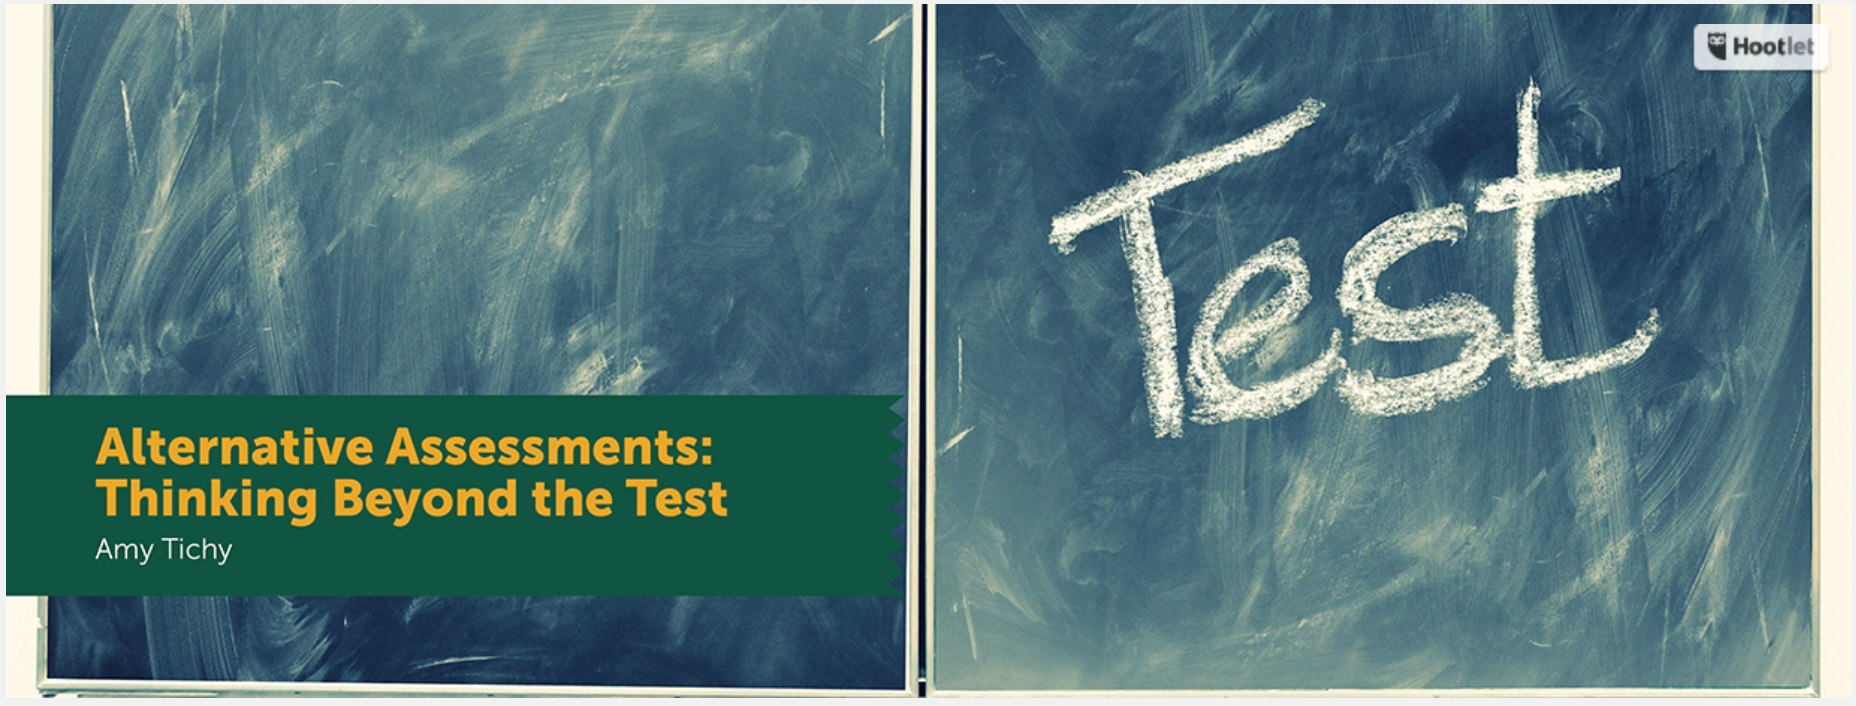 Alternative Assessments: Thinking Beyond the Test by Amy Tichy